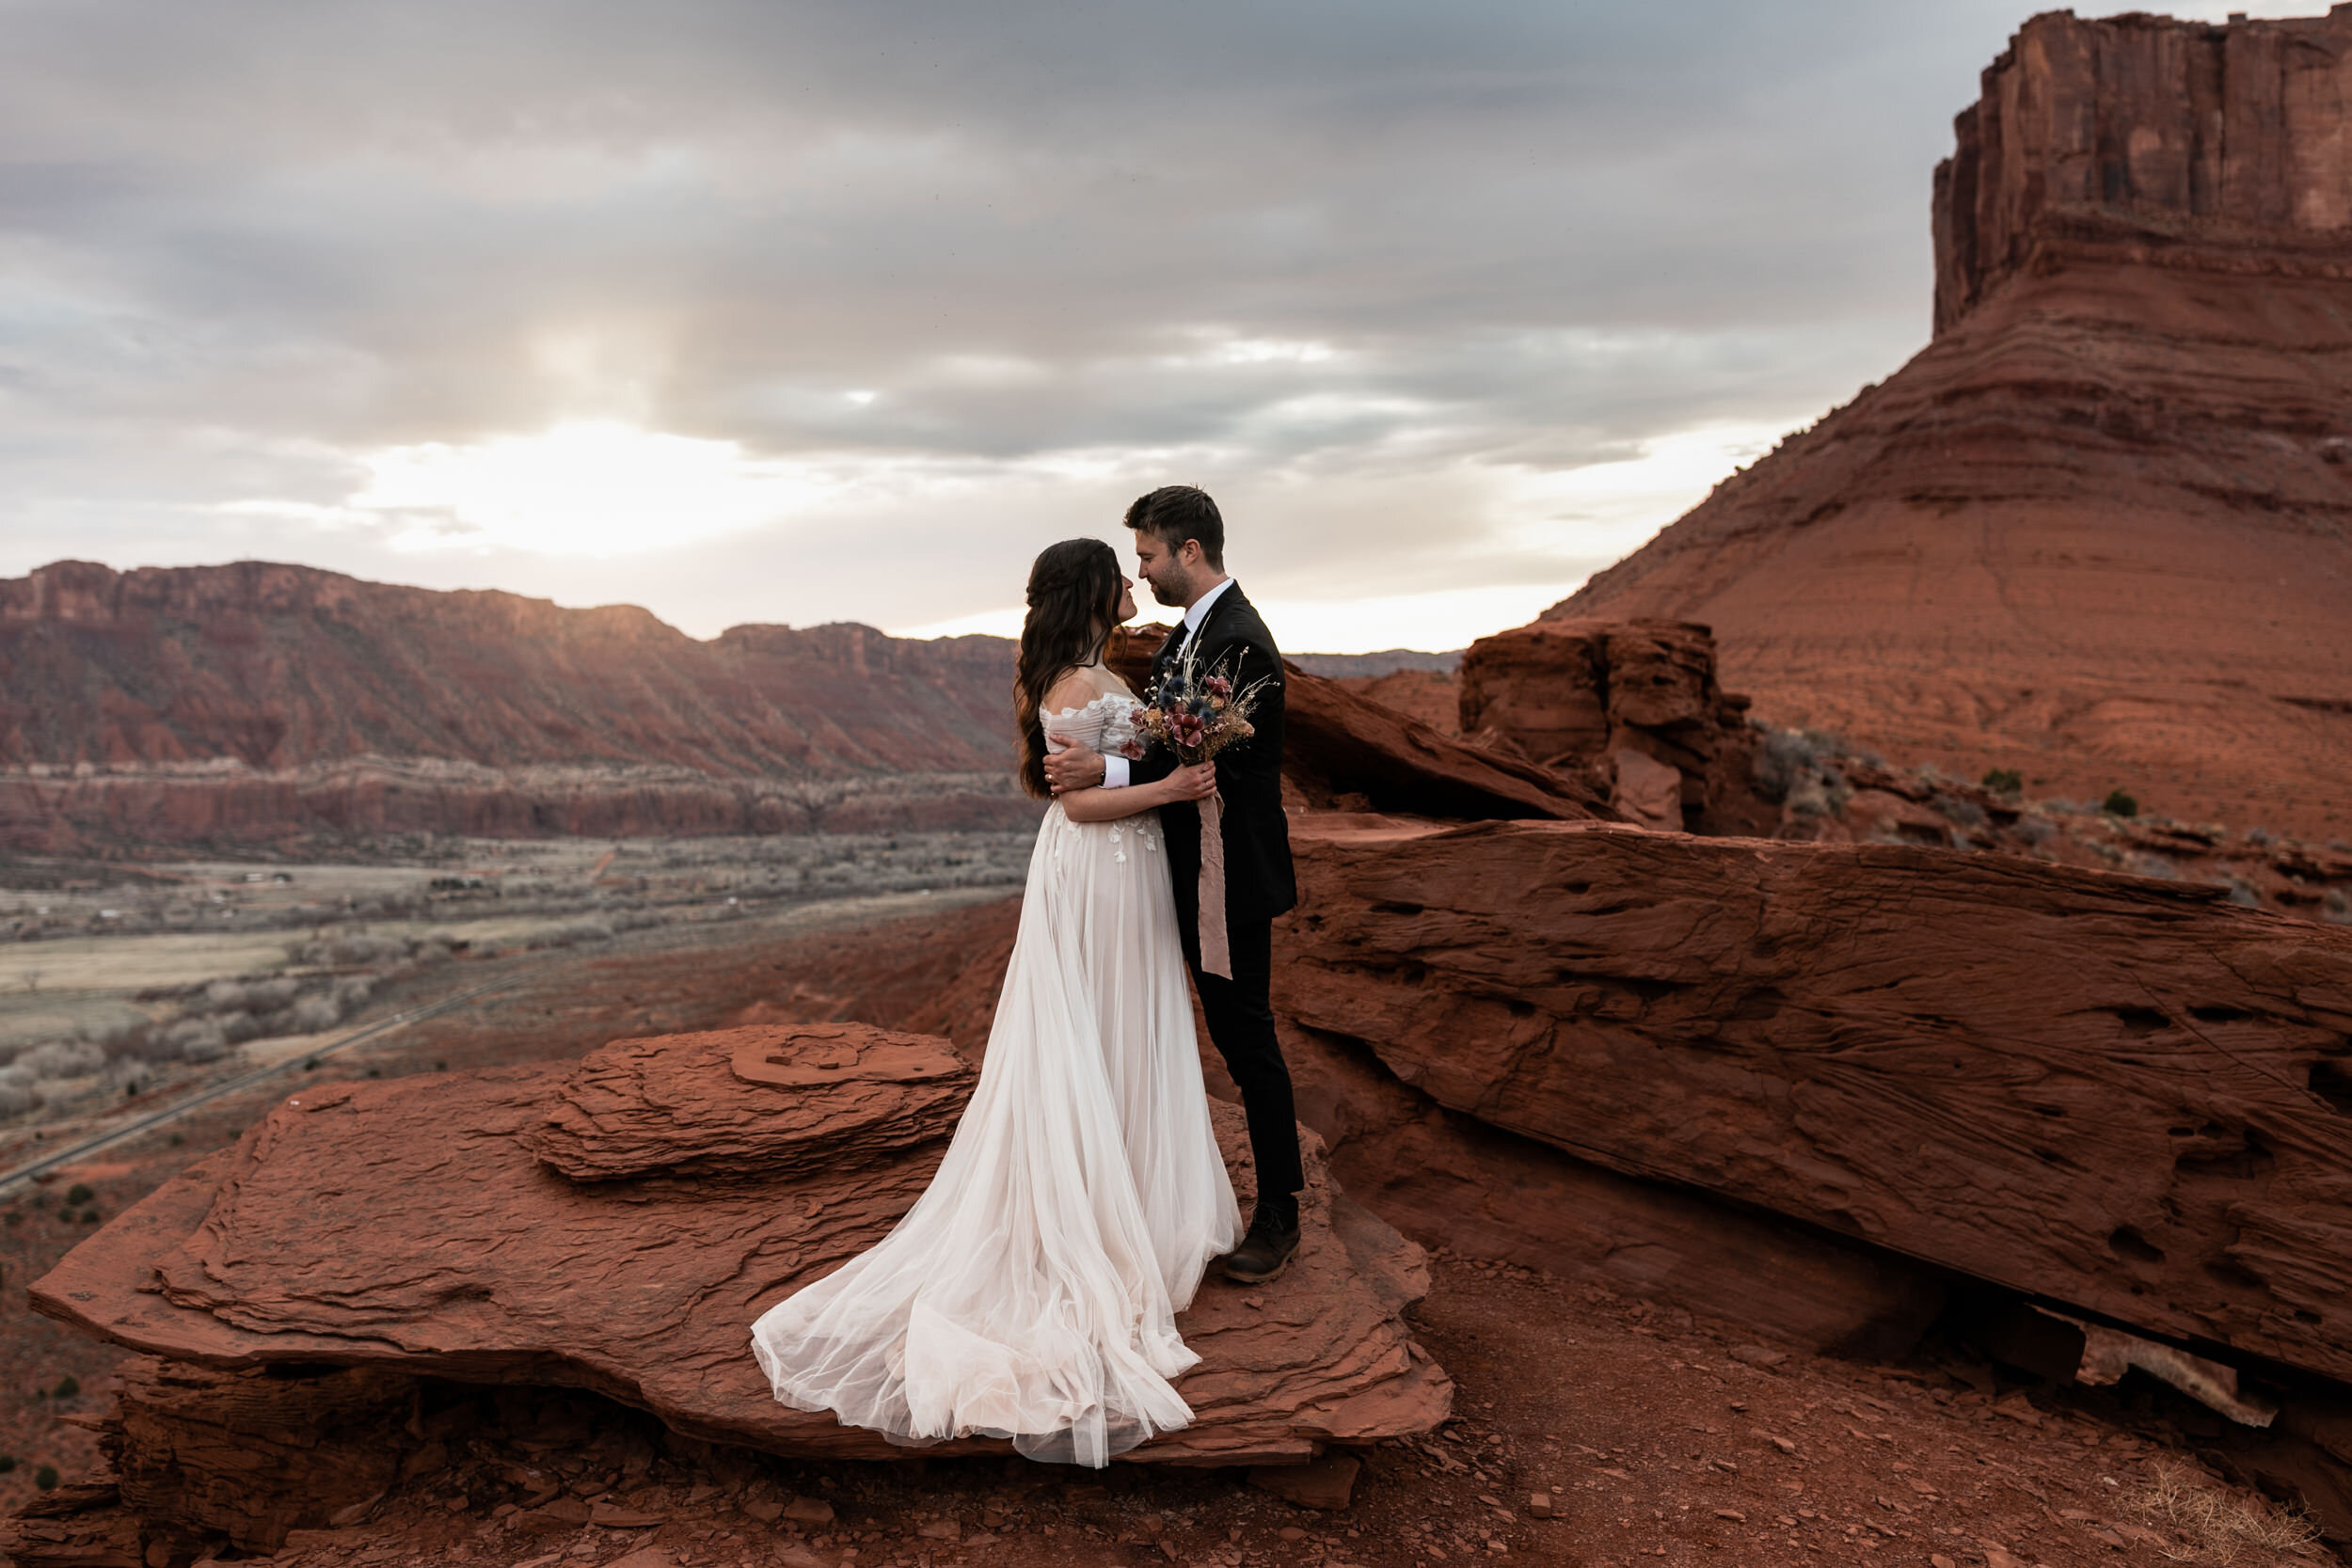 Moab Utah Elopement | Adventurous Small Wedding in Nature | The Hearnes Photography